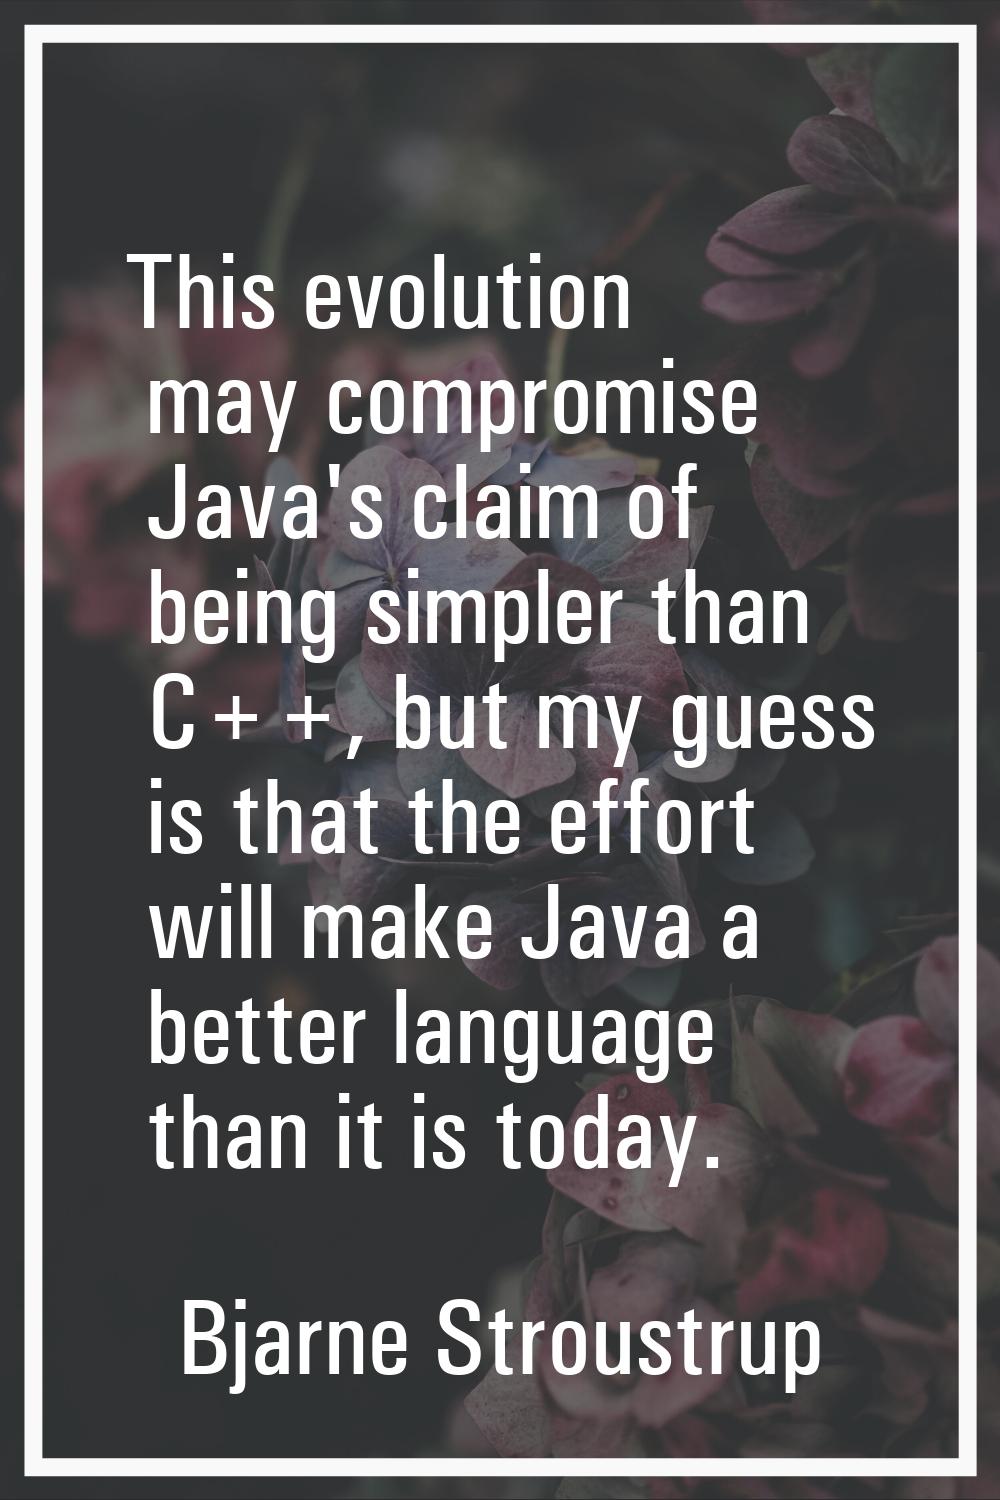 This evolution may compromise Java's claim of being simpler than C++, but my guess is that the effo